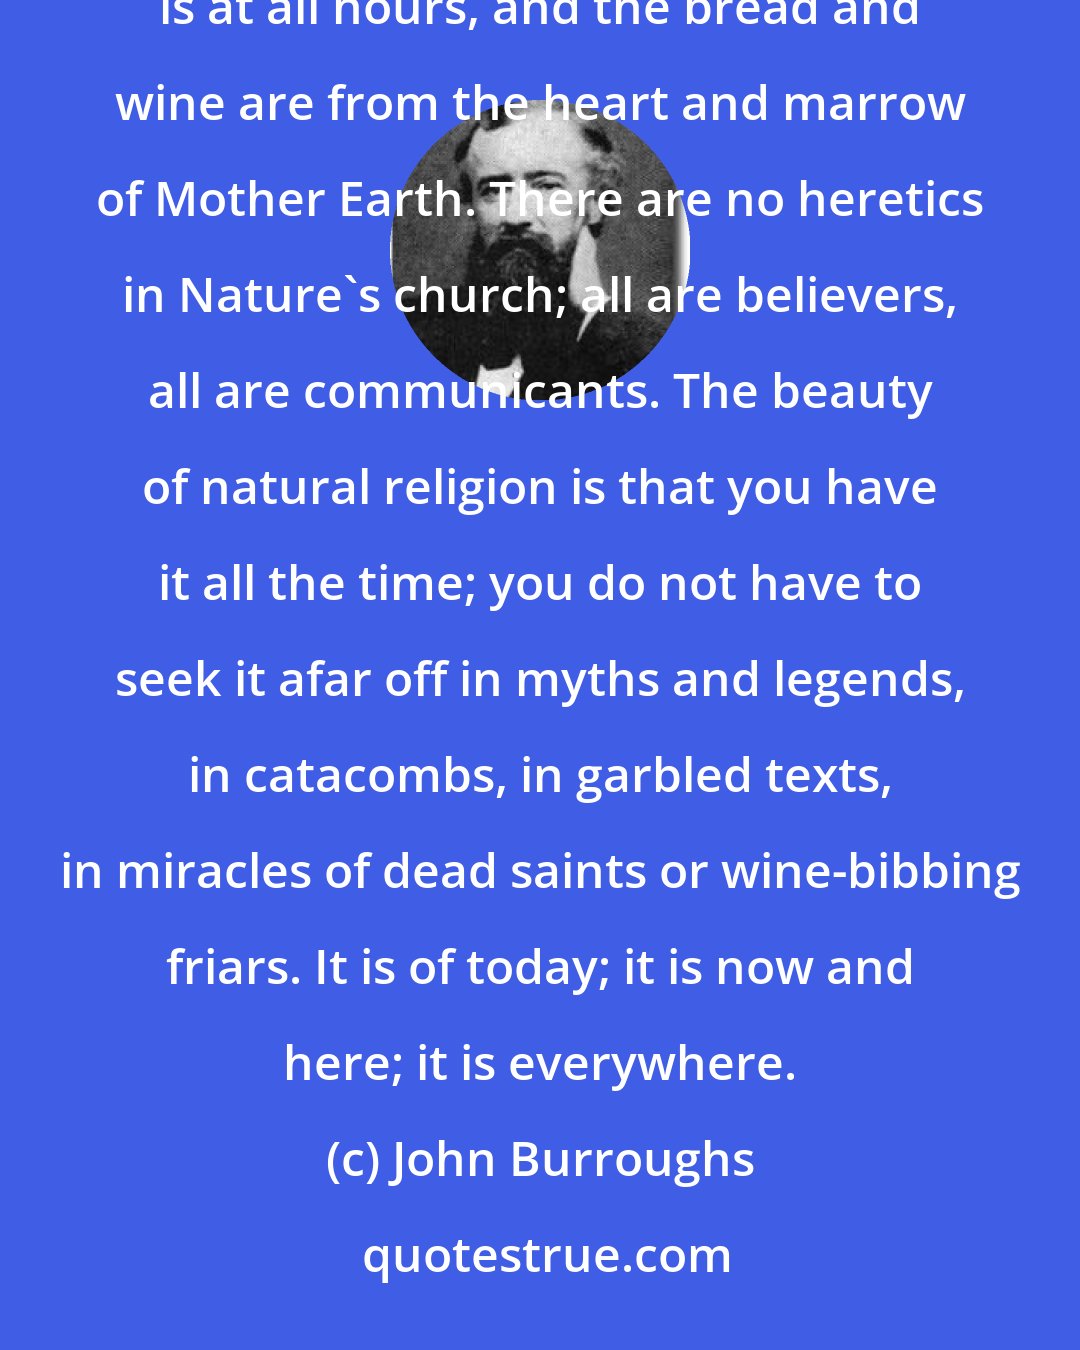 John Burroughs: Every walk to the woods is a religious rite, every bath in the stream is a saving ordinance. Communion service is at all hours, and the bread and wine are from the heart and marrow of Mother Earth. There are no heretics in Nature's church; all are believers, all are communicants. The beauty of natural religion is that you have it all the time; you do not have to seek it afar off in myths and legends, in catacombs, in garbled texts, in miracles of dead saints or wine-bibbing friars. It is of today; it is now and here; it is everywhere.